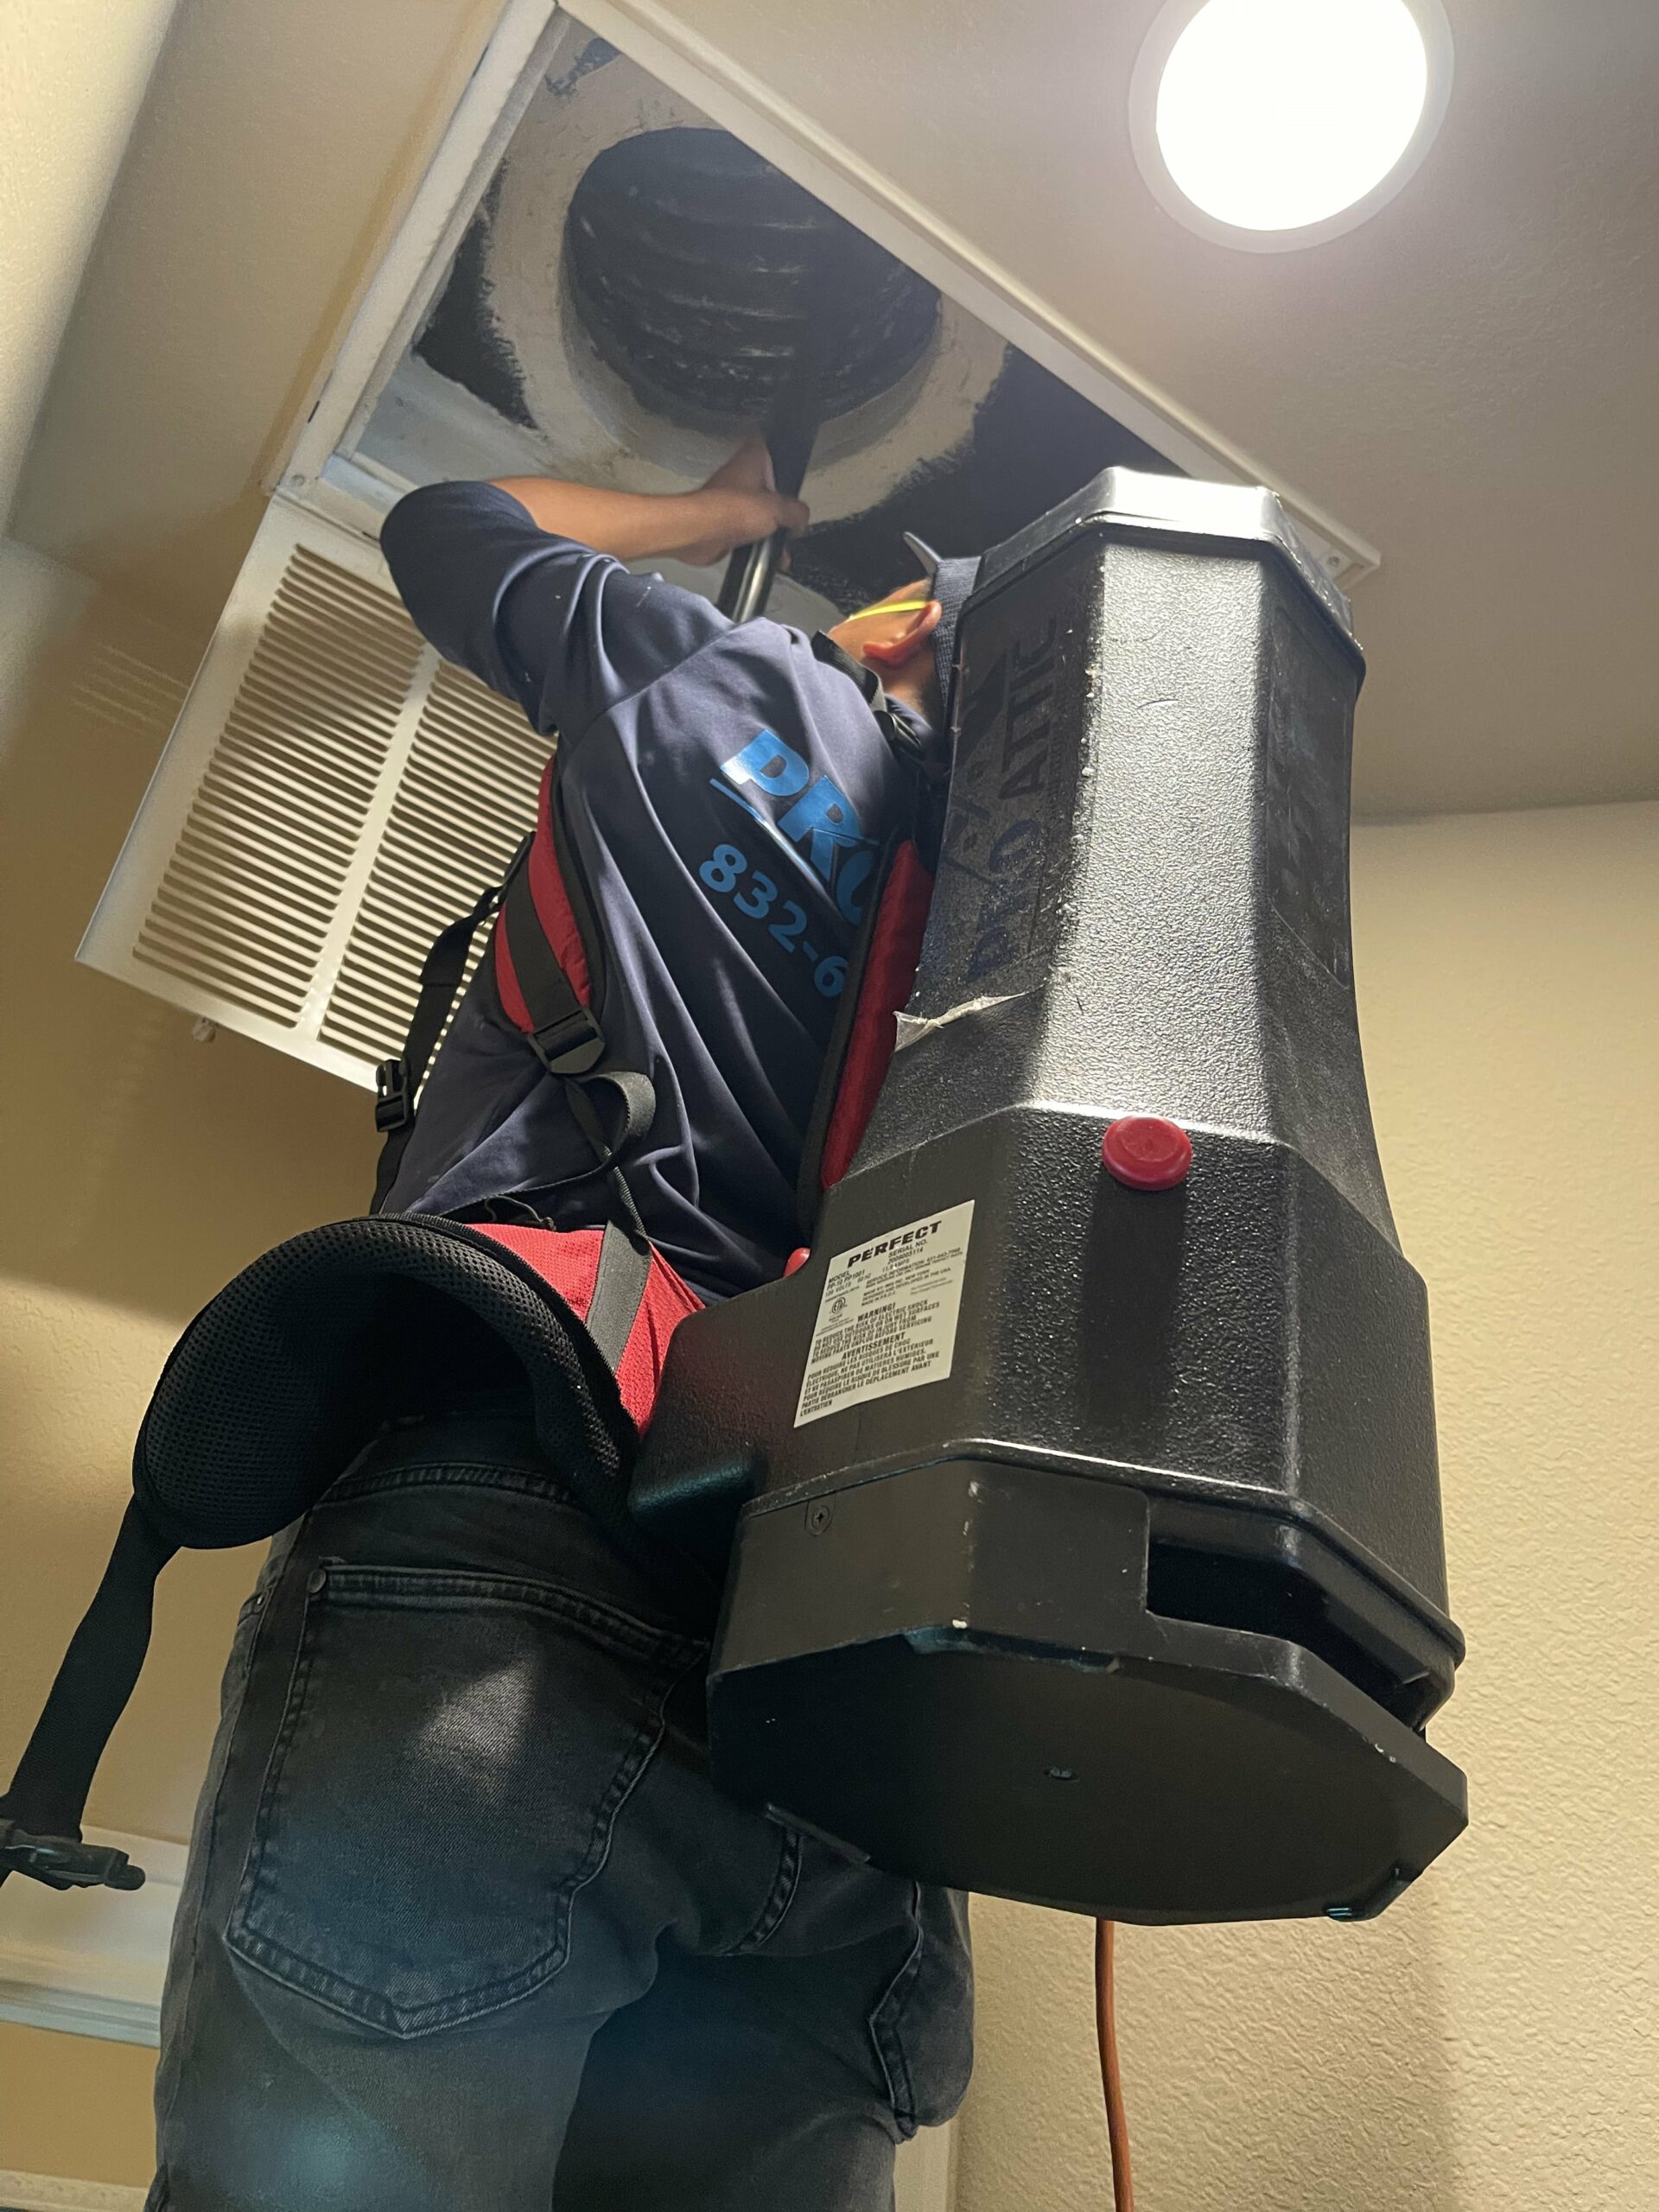 Air duct cleaning service (return air {intake} cleaning)